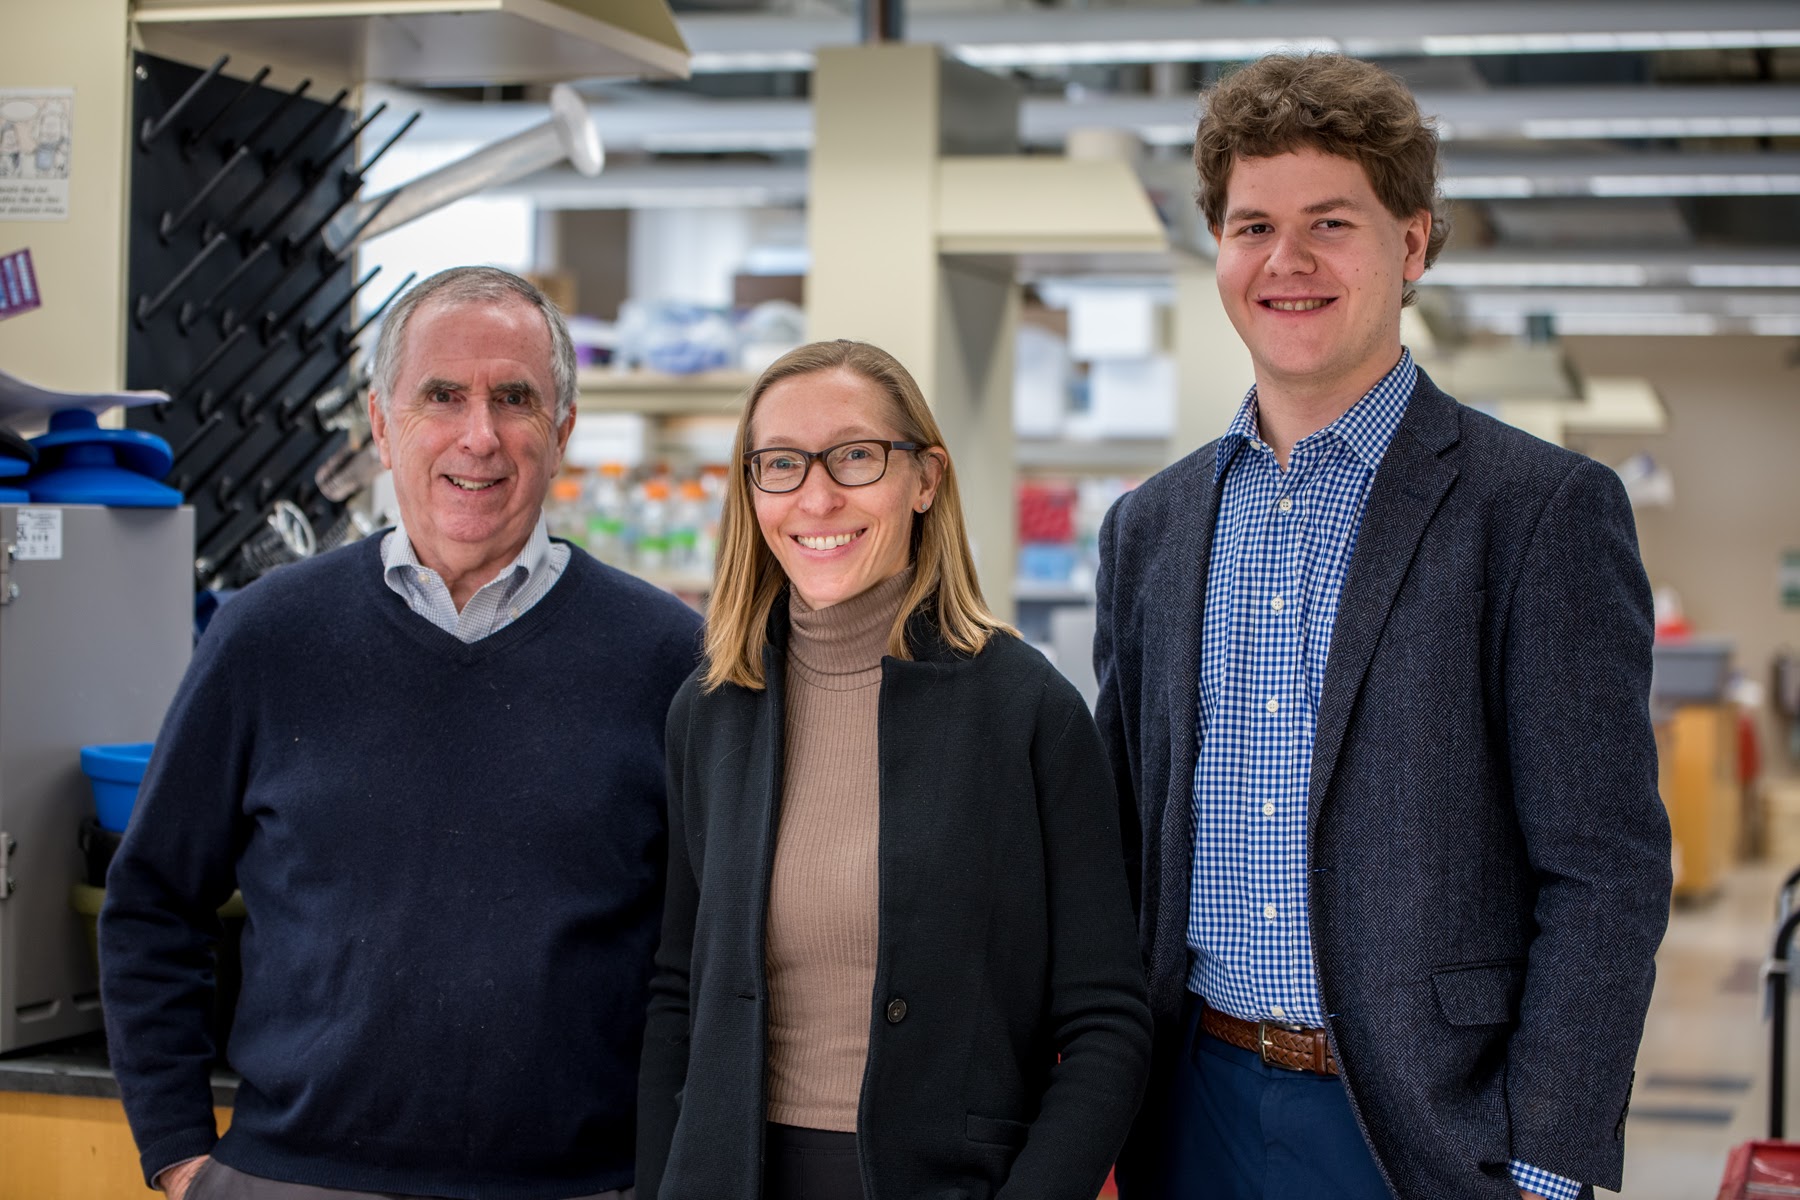 Justin Fallon, Ashley Webb, and Johnny Page are co-founders of the biotechnology company Bolden Therapeutics, which received Brown's 2022 Start-Up of the Year award.